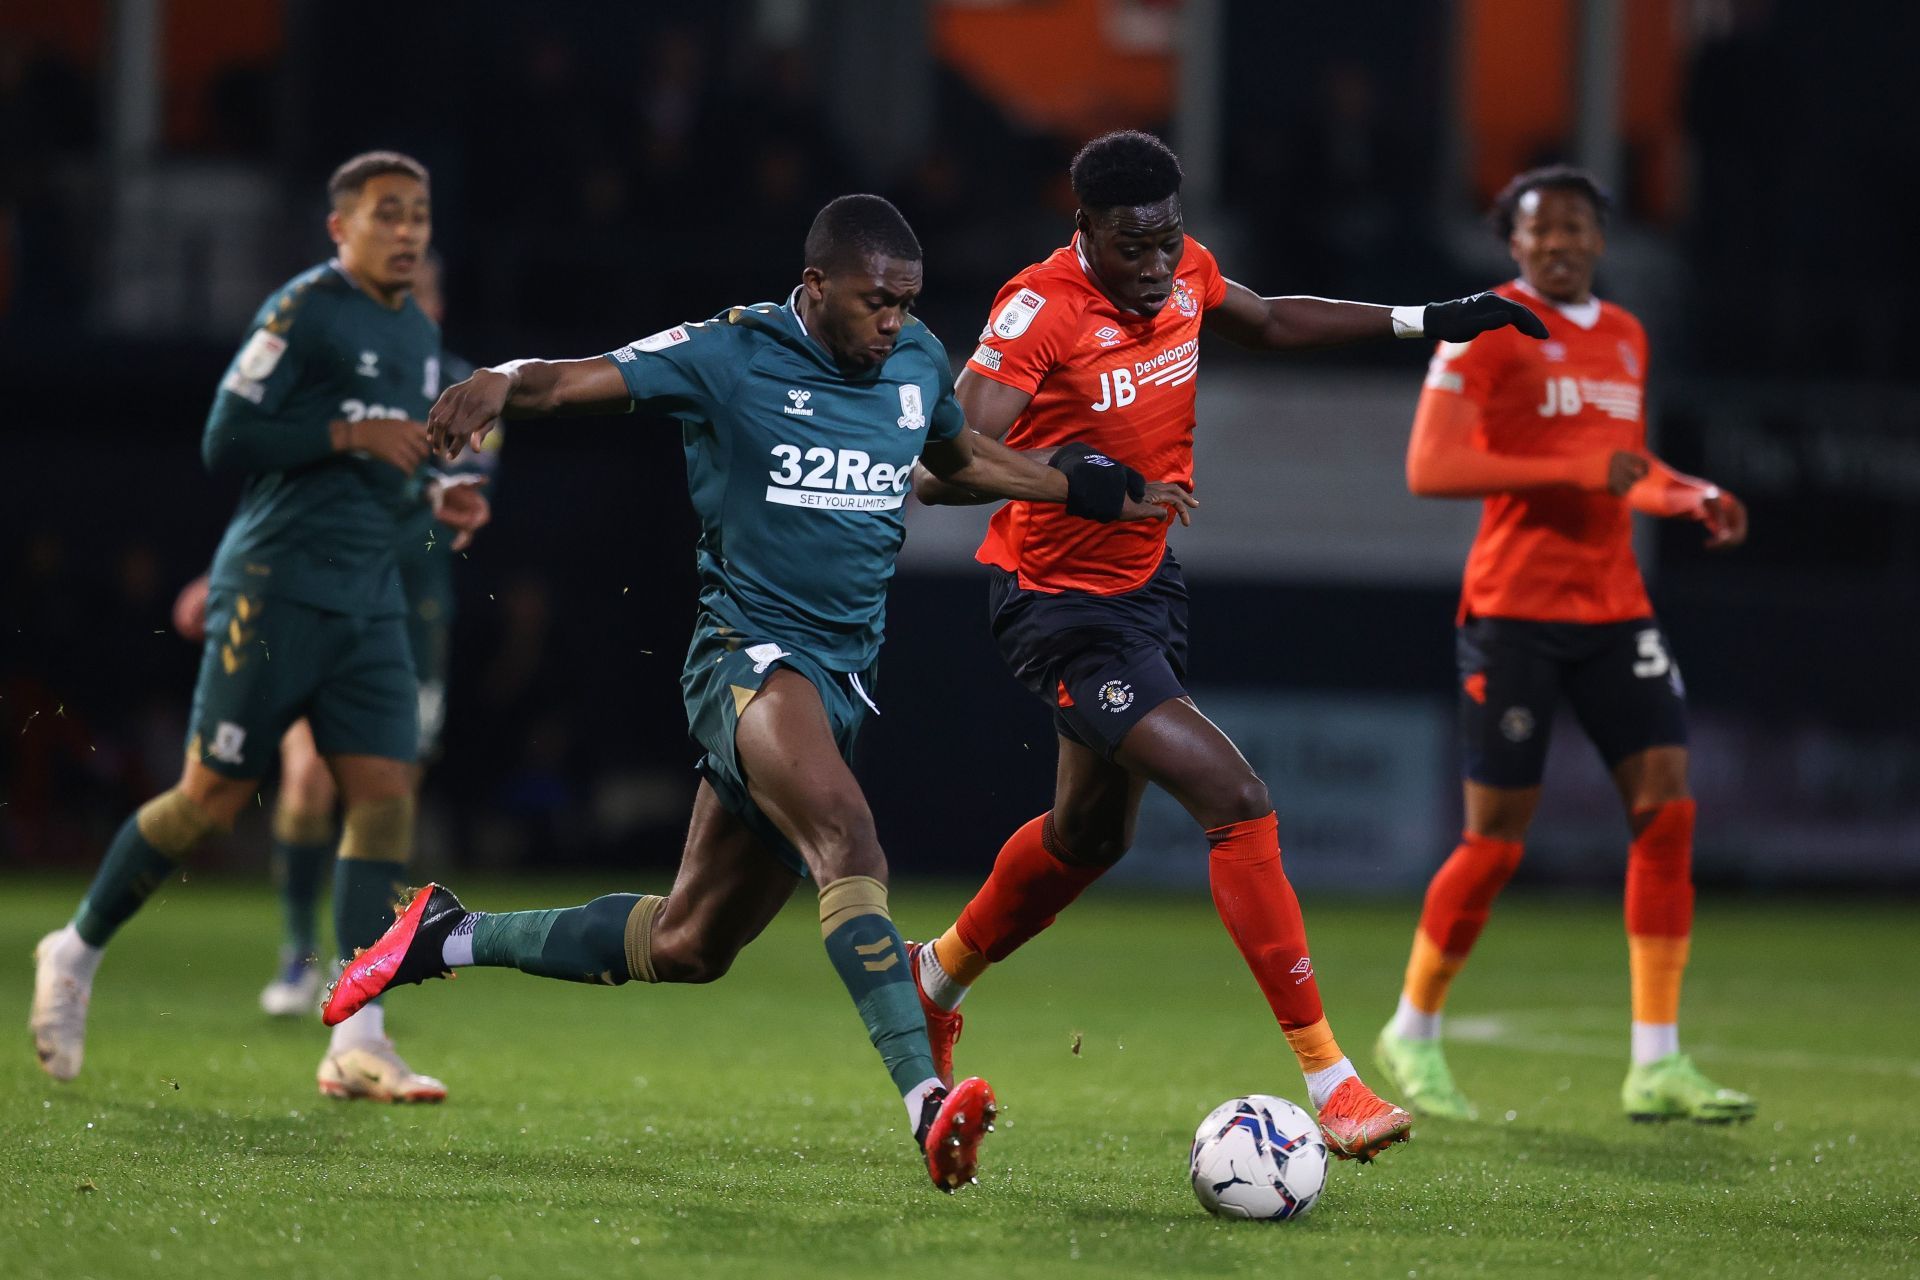 Luton Town and Middlesbrough shared the spoils in the reverse earlier this season